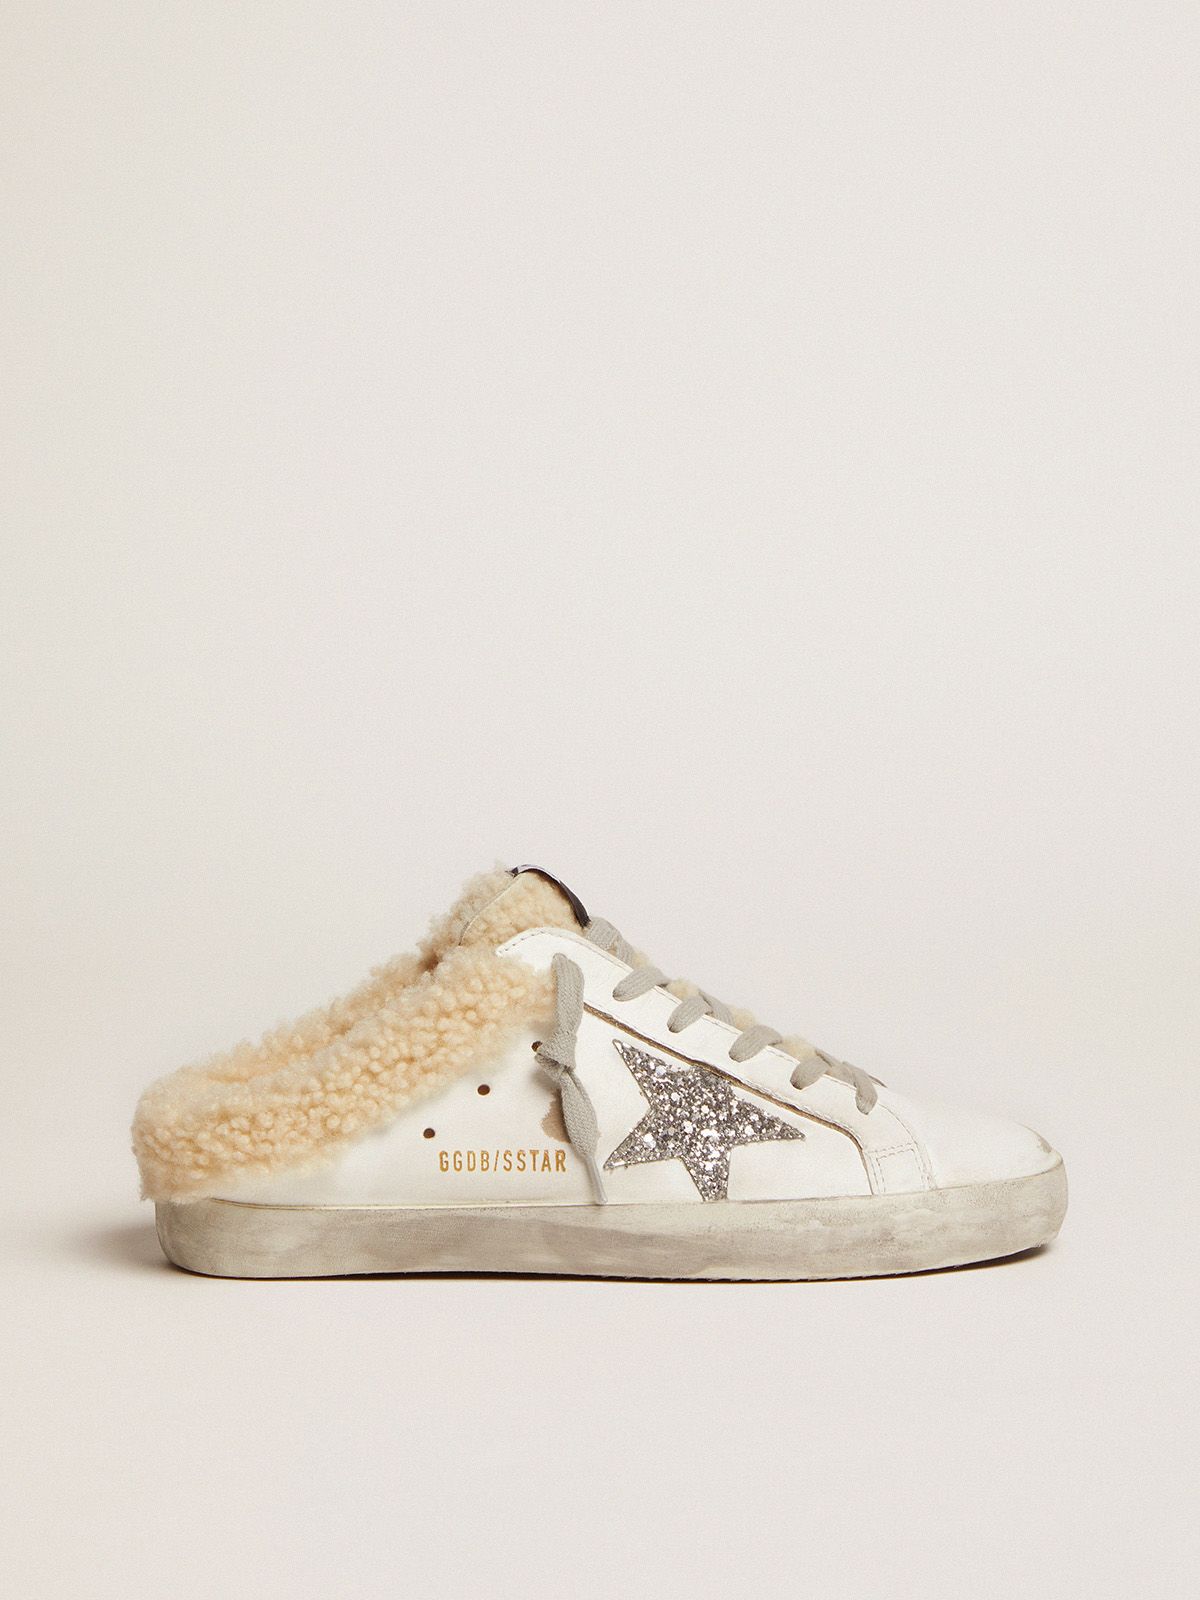 golden goose Sabots glitter with leather Super-Star in lining and shearling star white silver